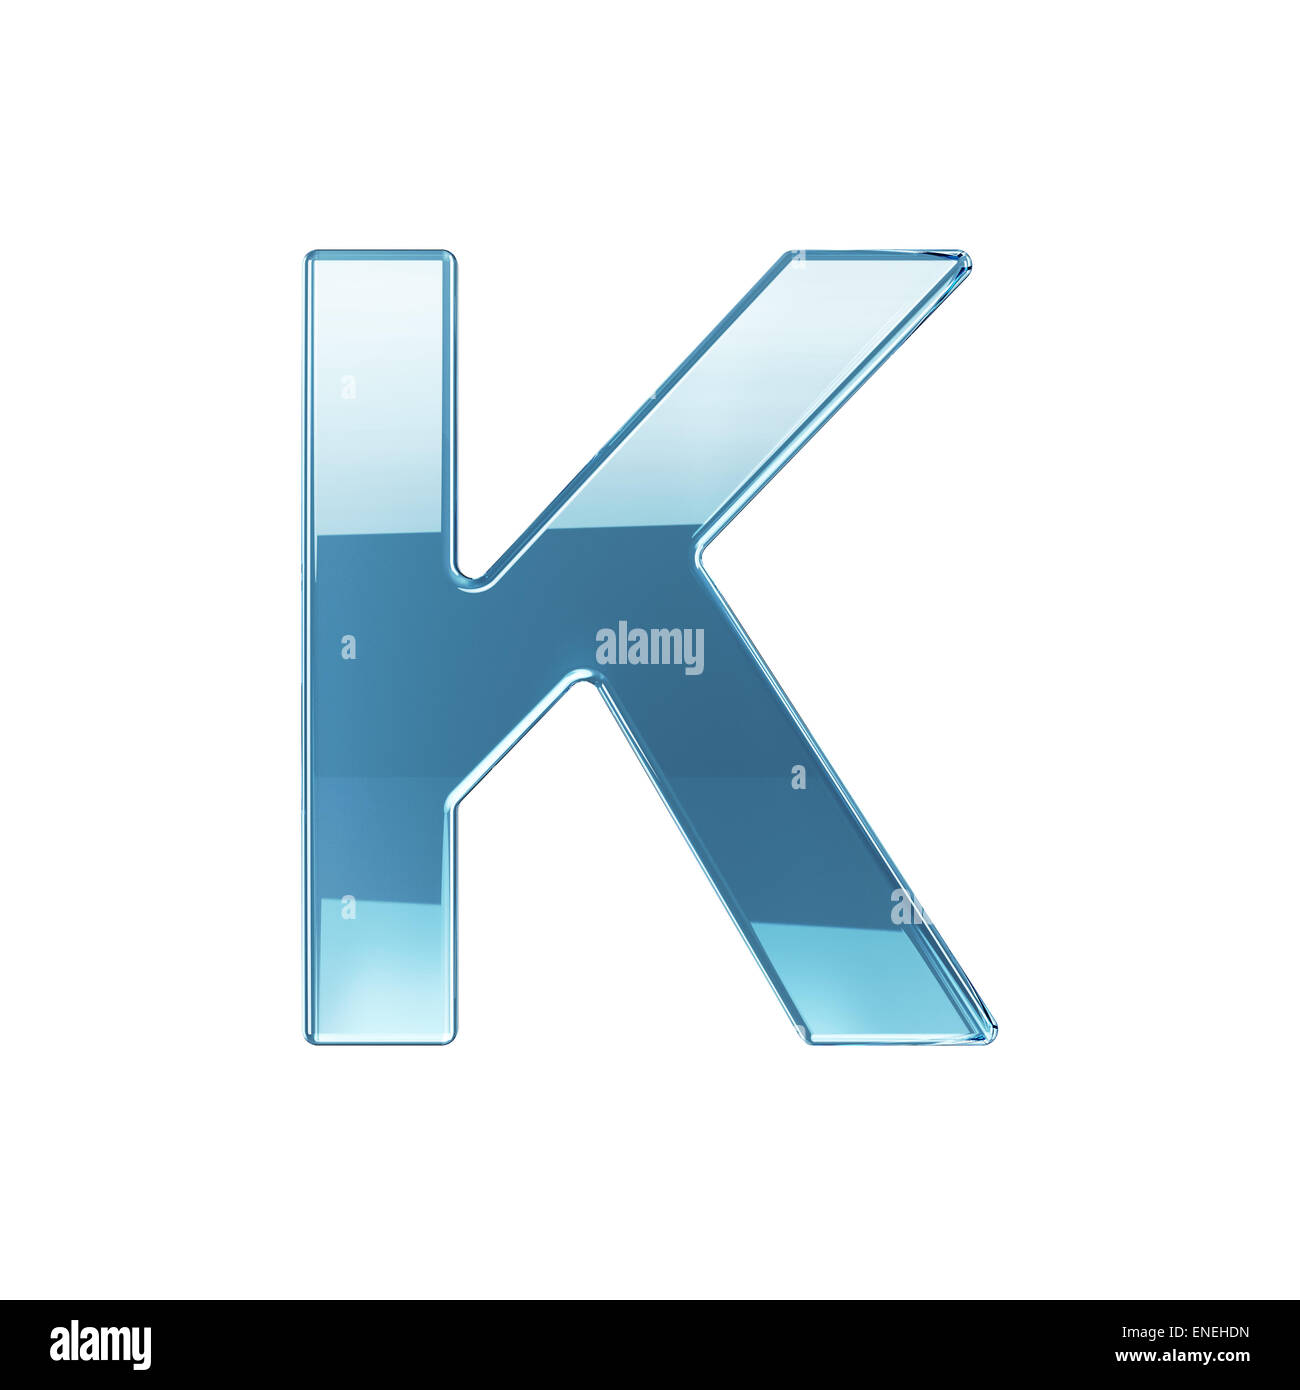 3d render of glass glossy transparent alphabet letter symbol - K. Isolated on white background Stock Photo